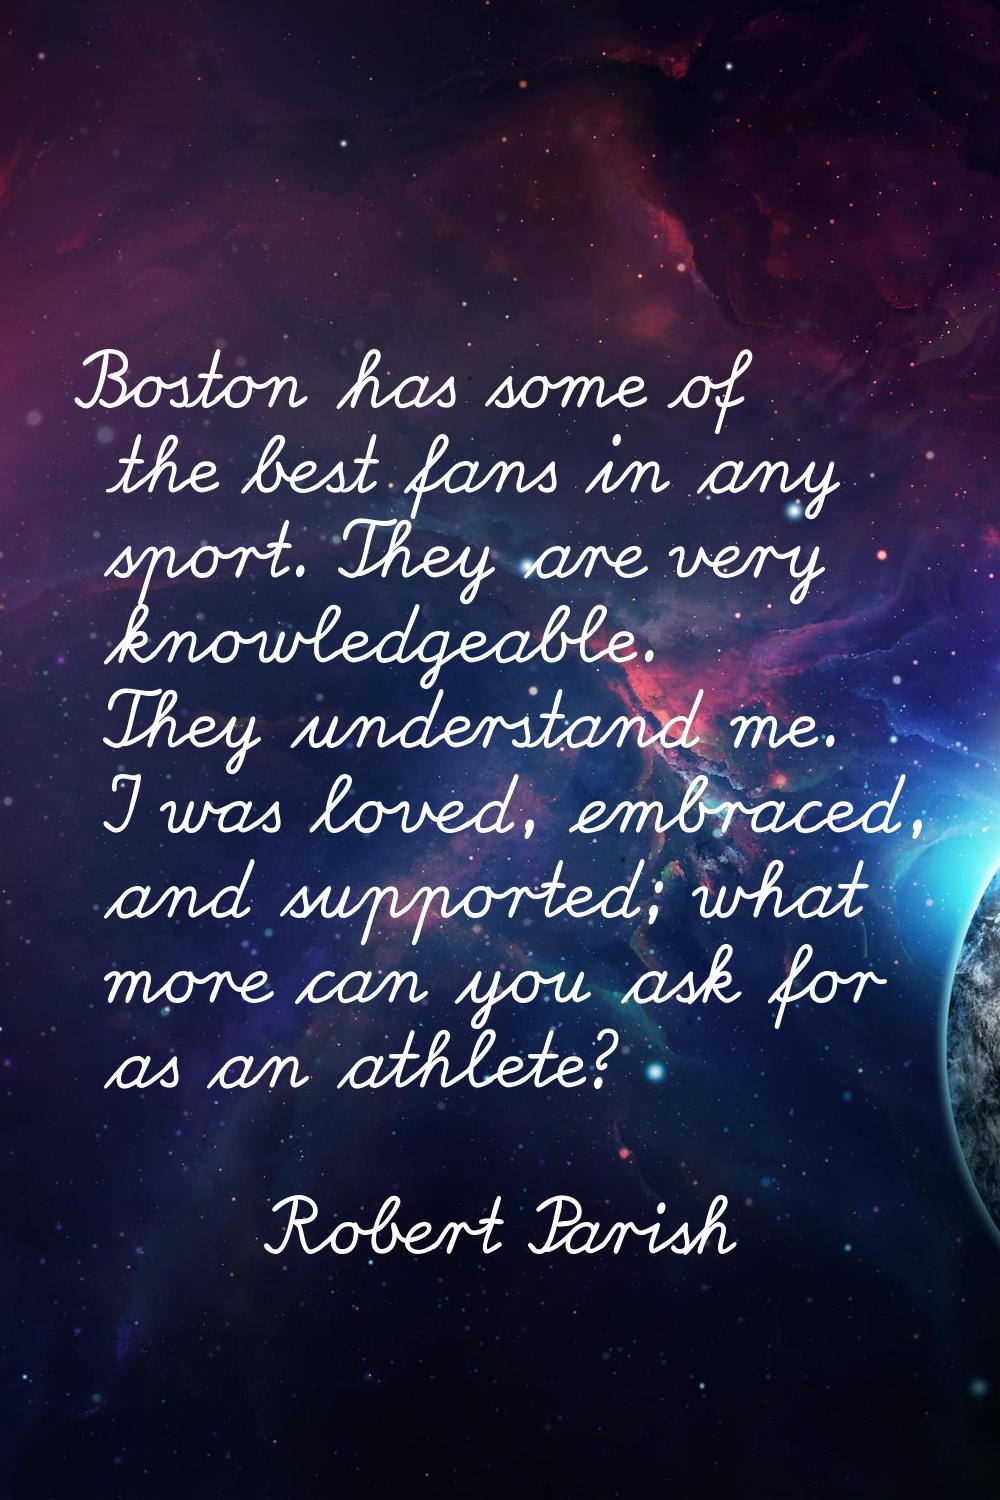 Boston has some of the best fans in any sport. They are very knowledgeable. They understand me. I w